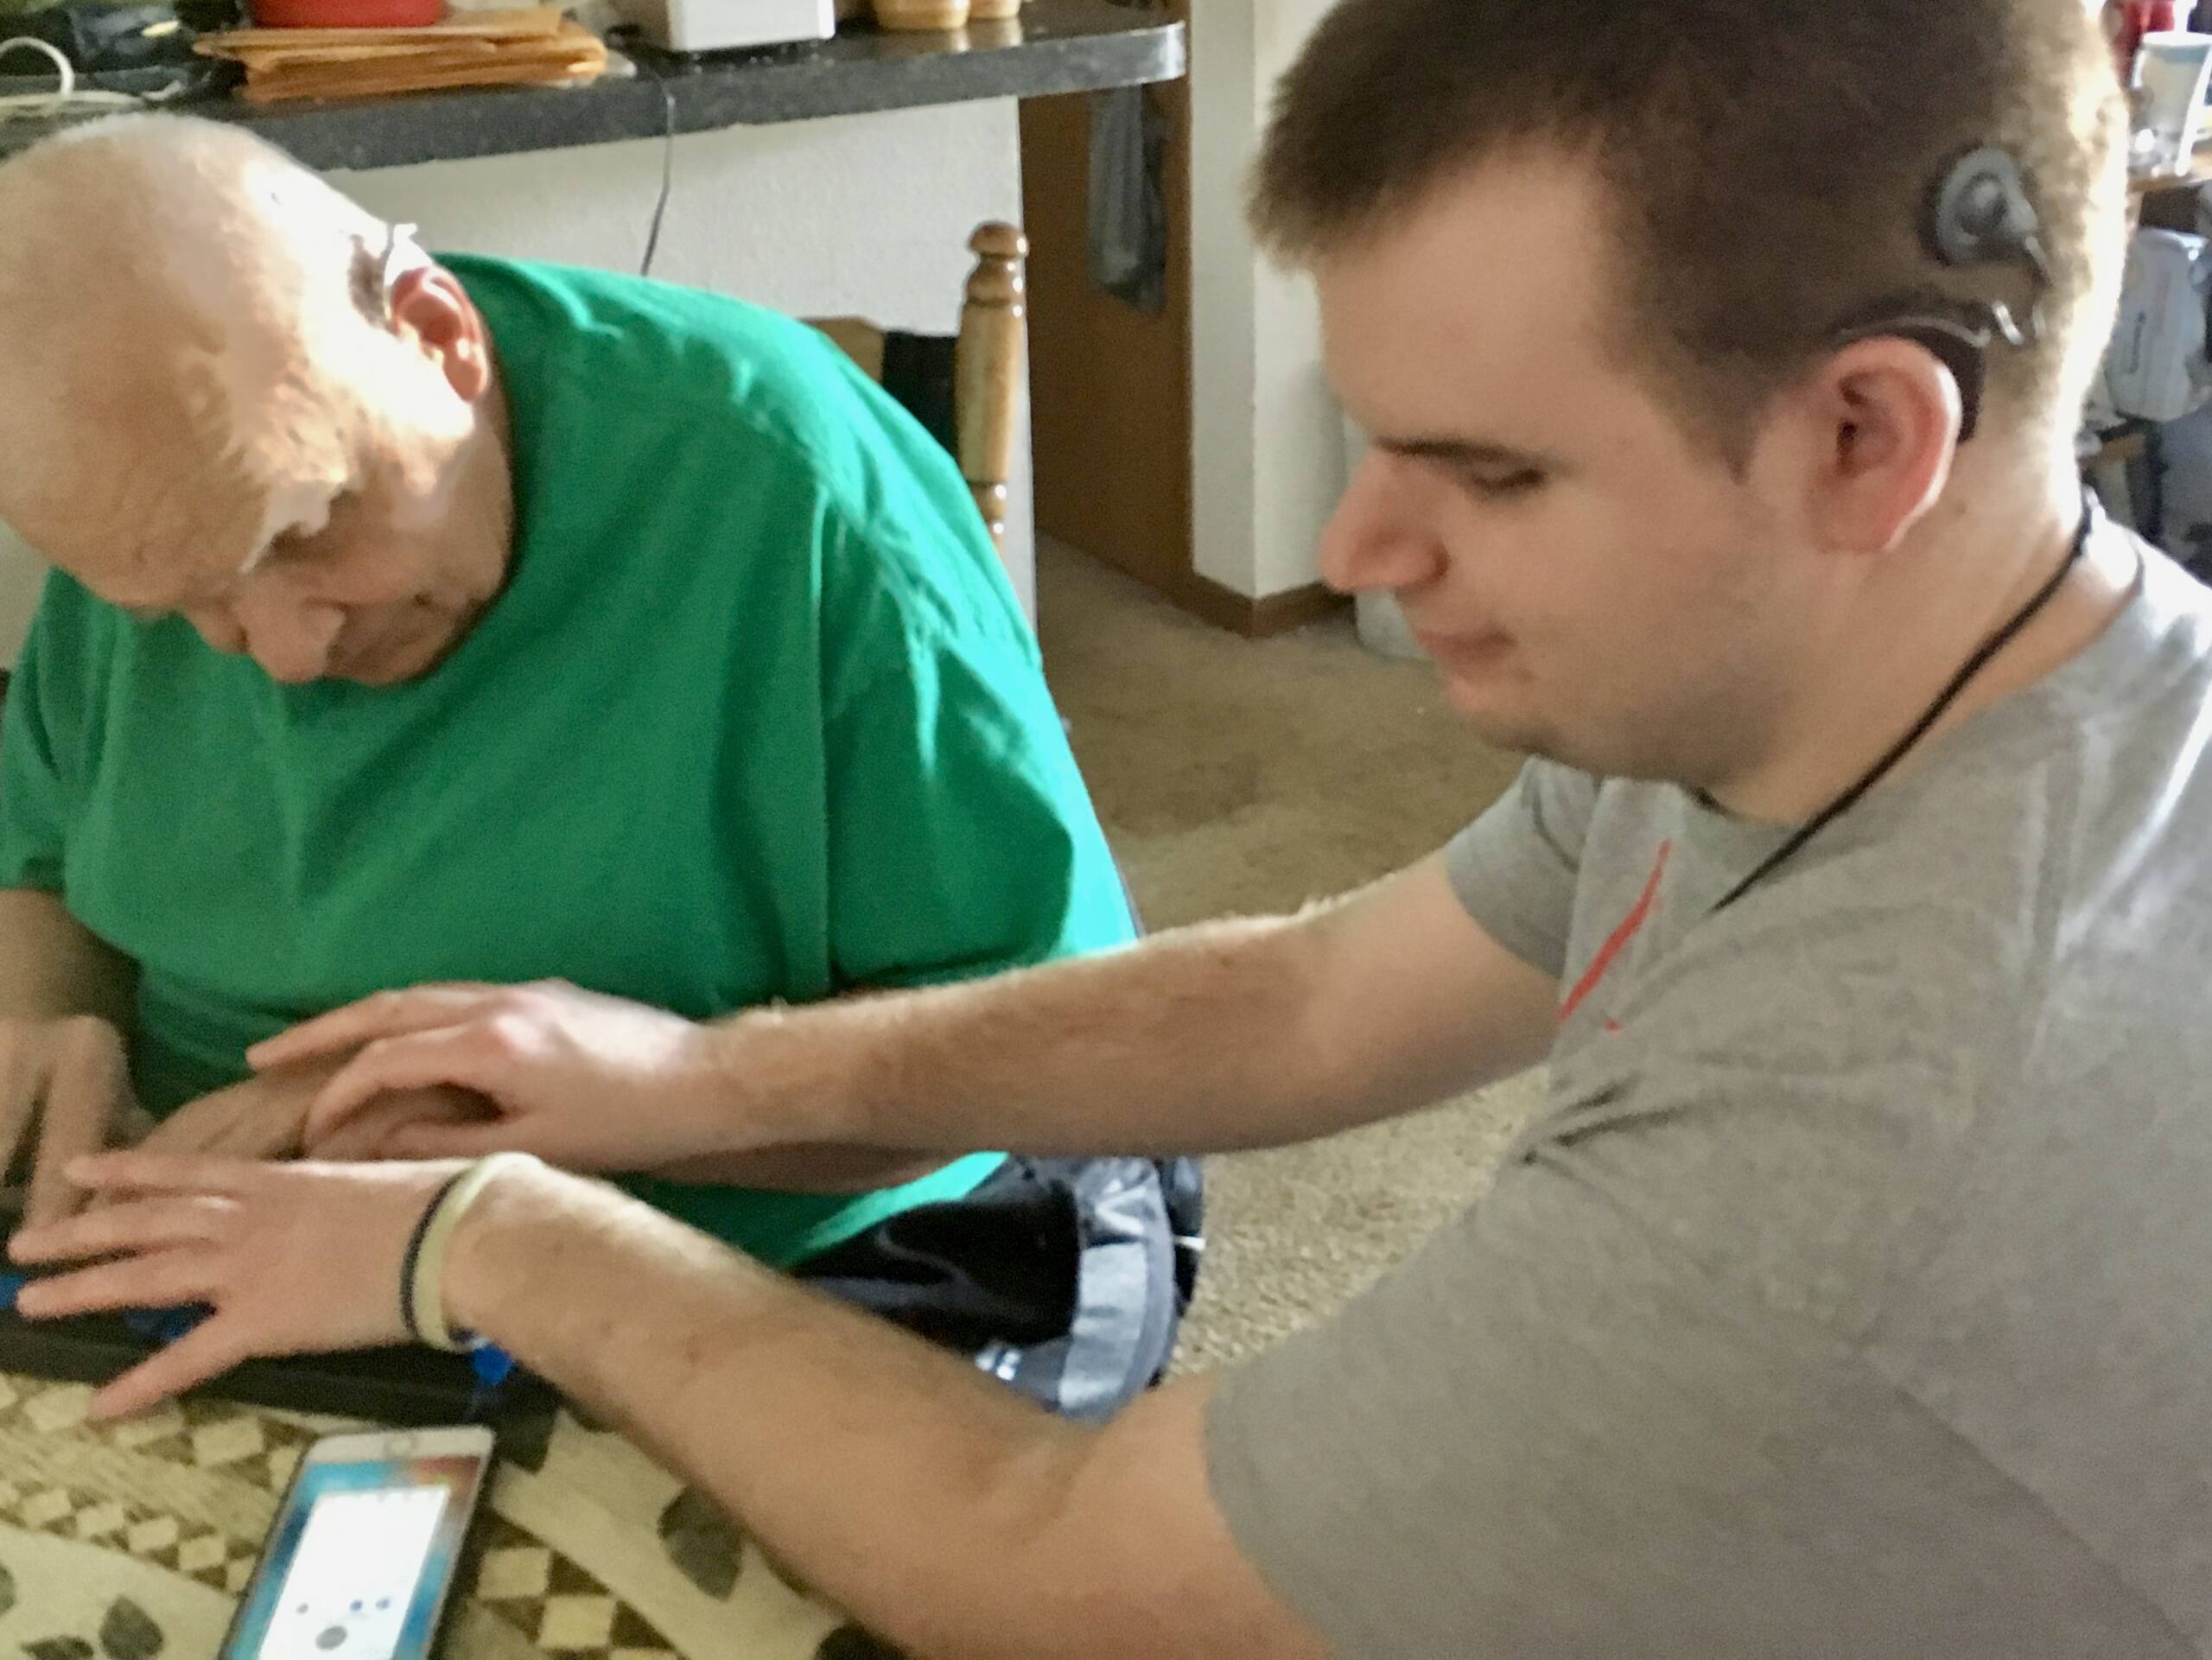 In the photo, Brett (on the right) is training iCanConnect Missouri consumer, Gary Jones, (left) on a braille device with his iPhone connected. Brett is using hand-over-hand training with Gary.